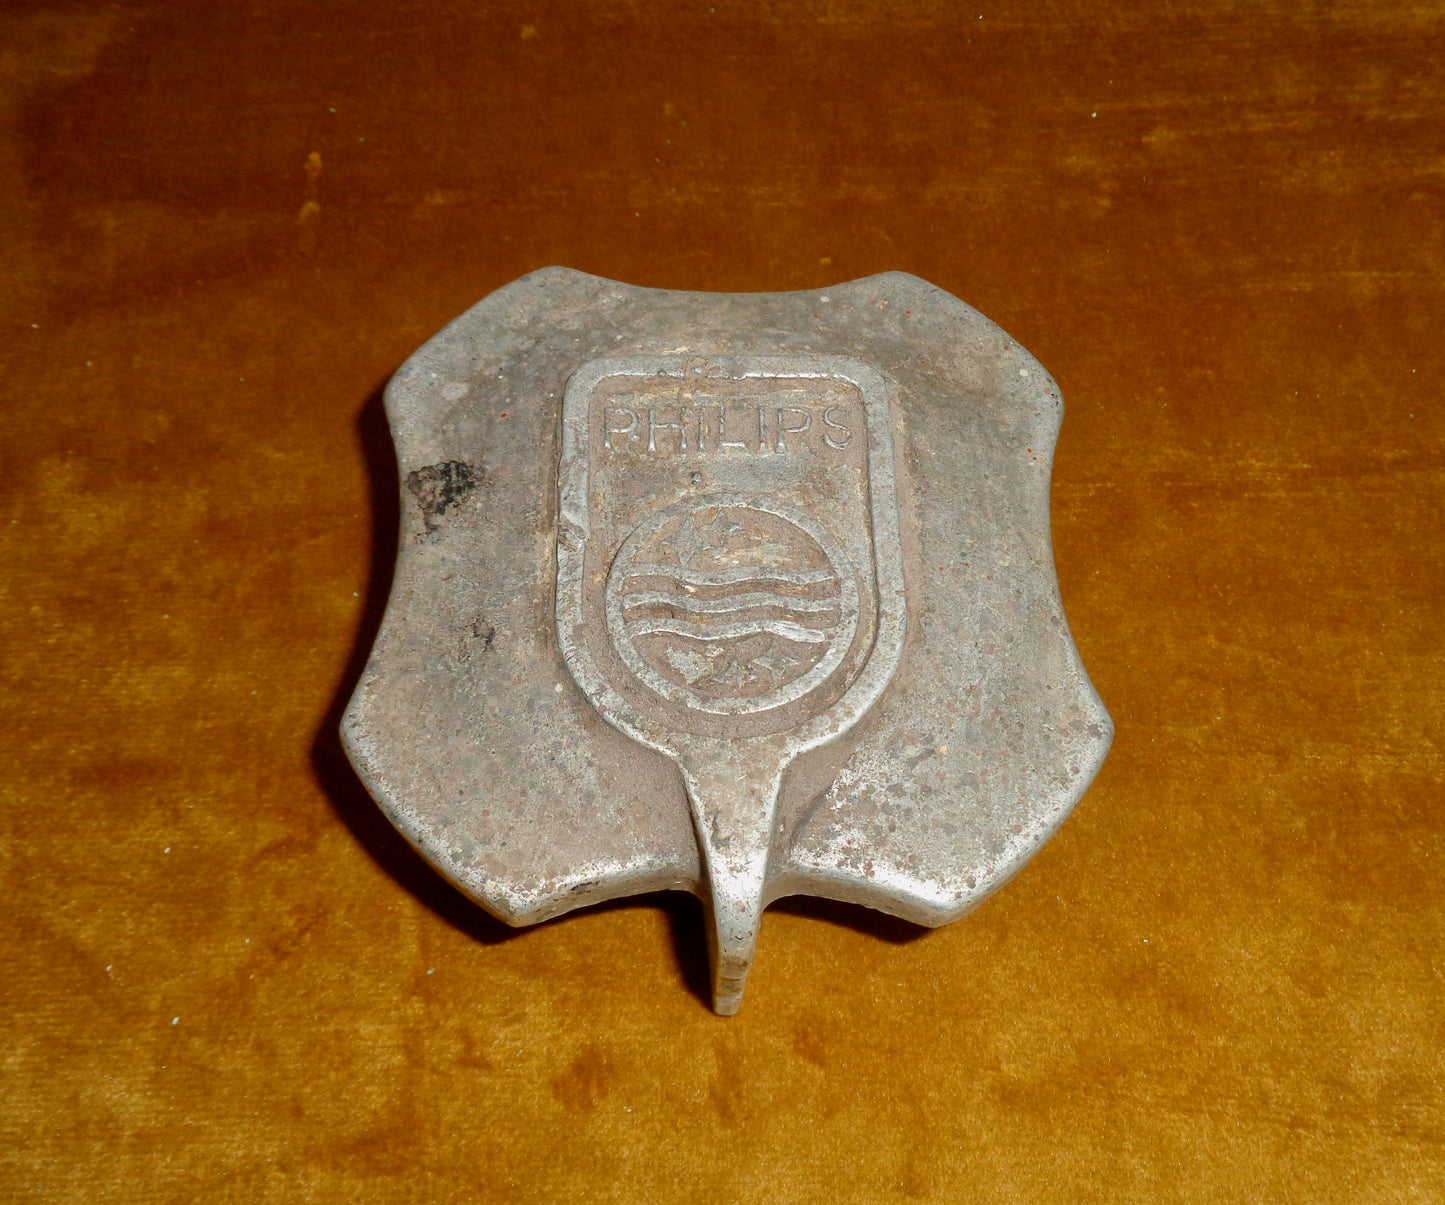 1940s Philips Cast Aluminium Handle From A Broadcast Transmitter Cabinet